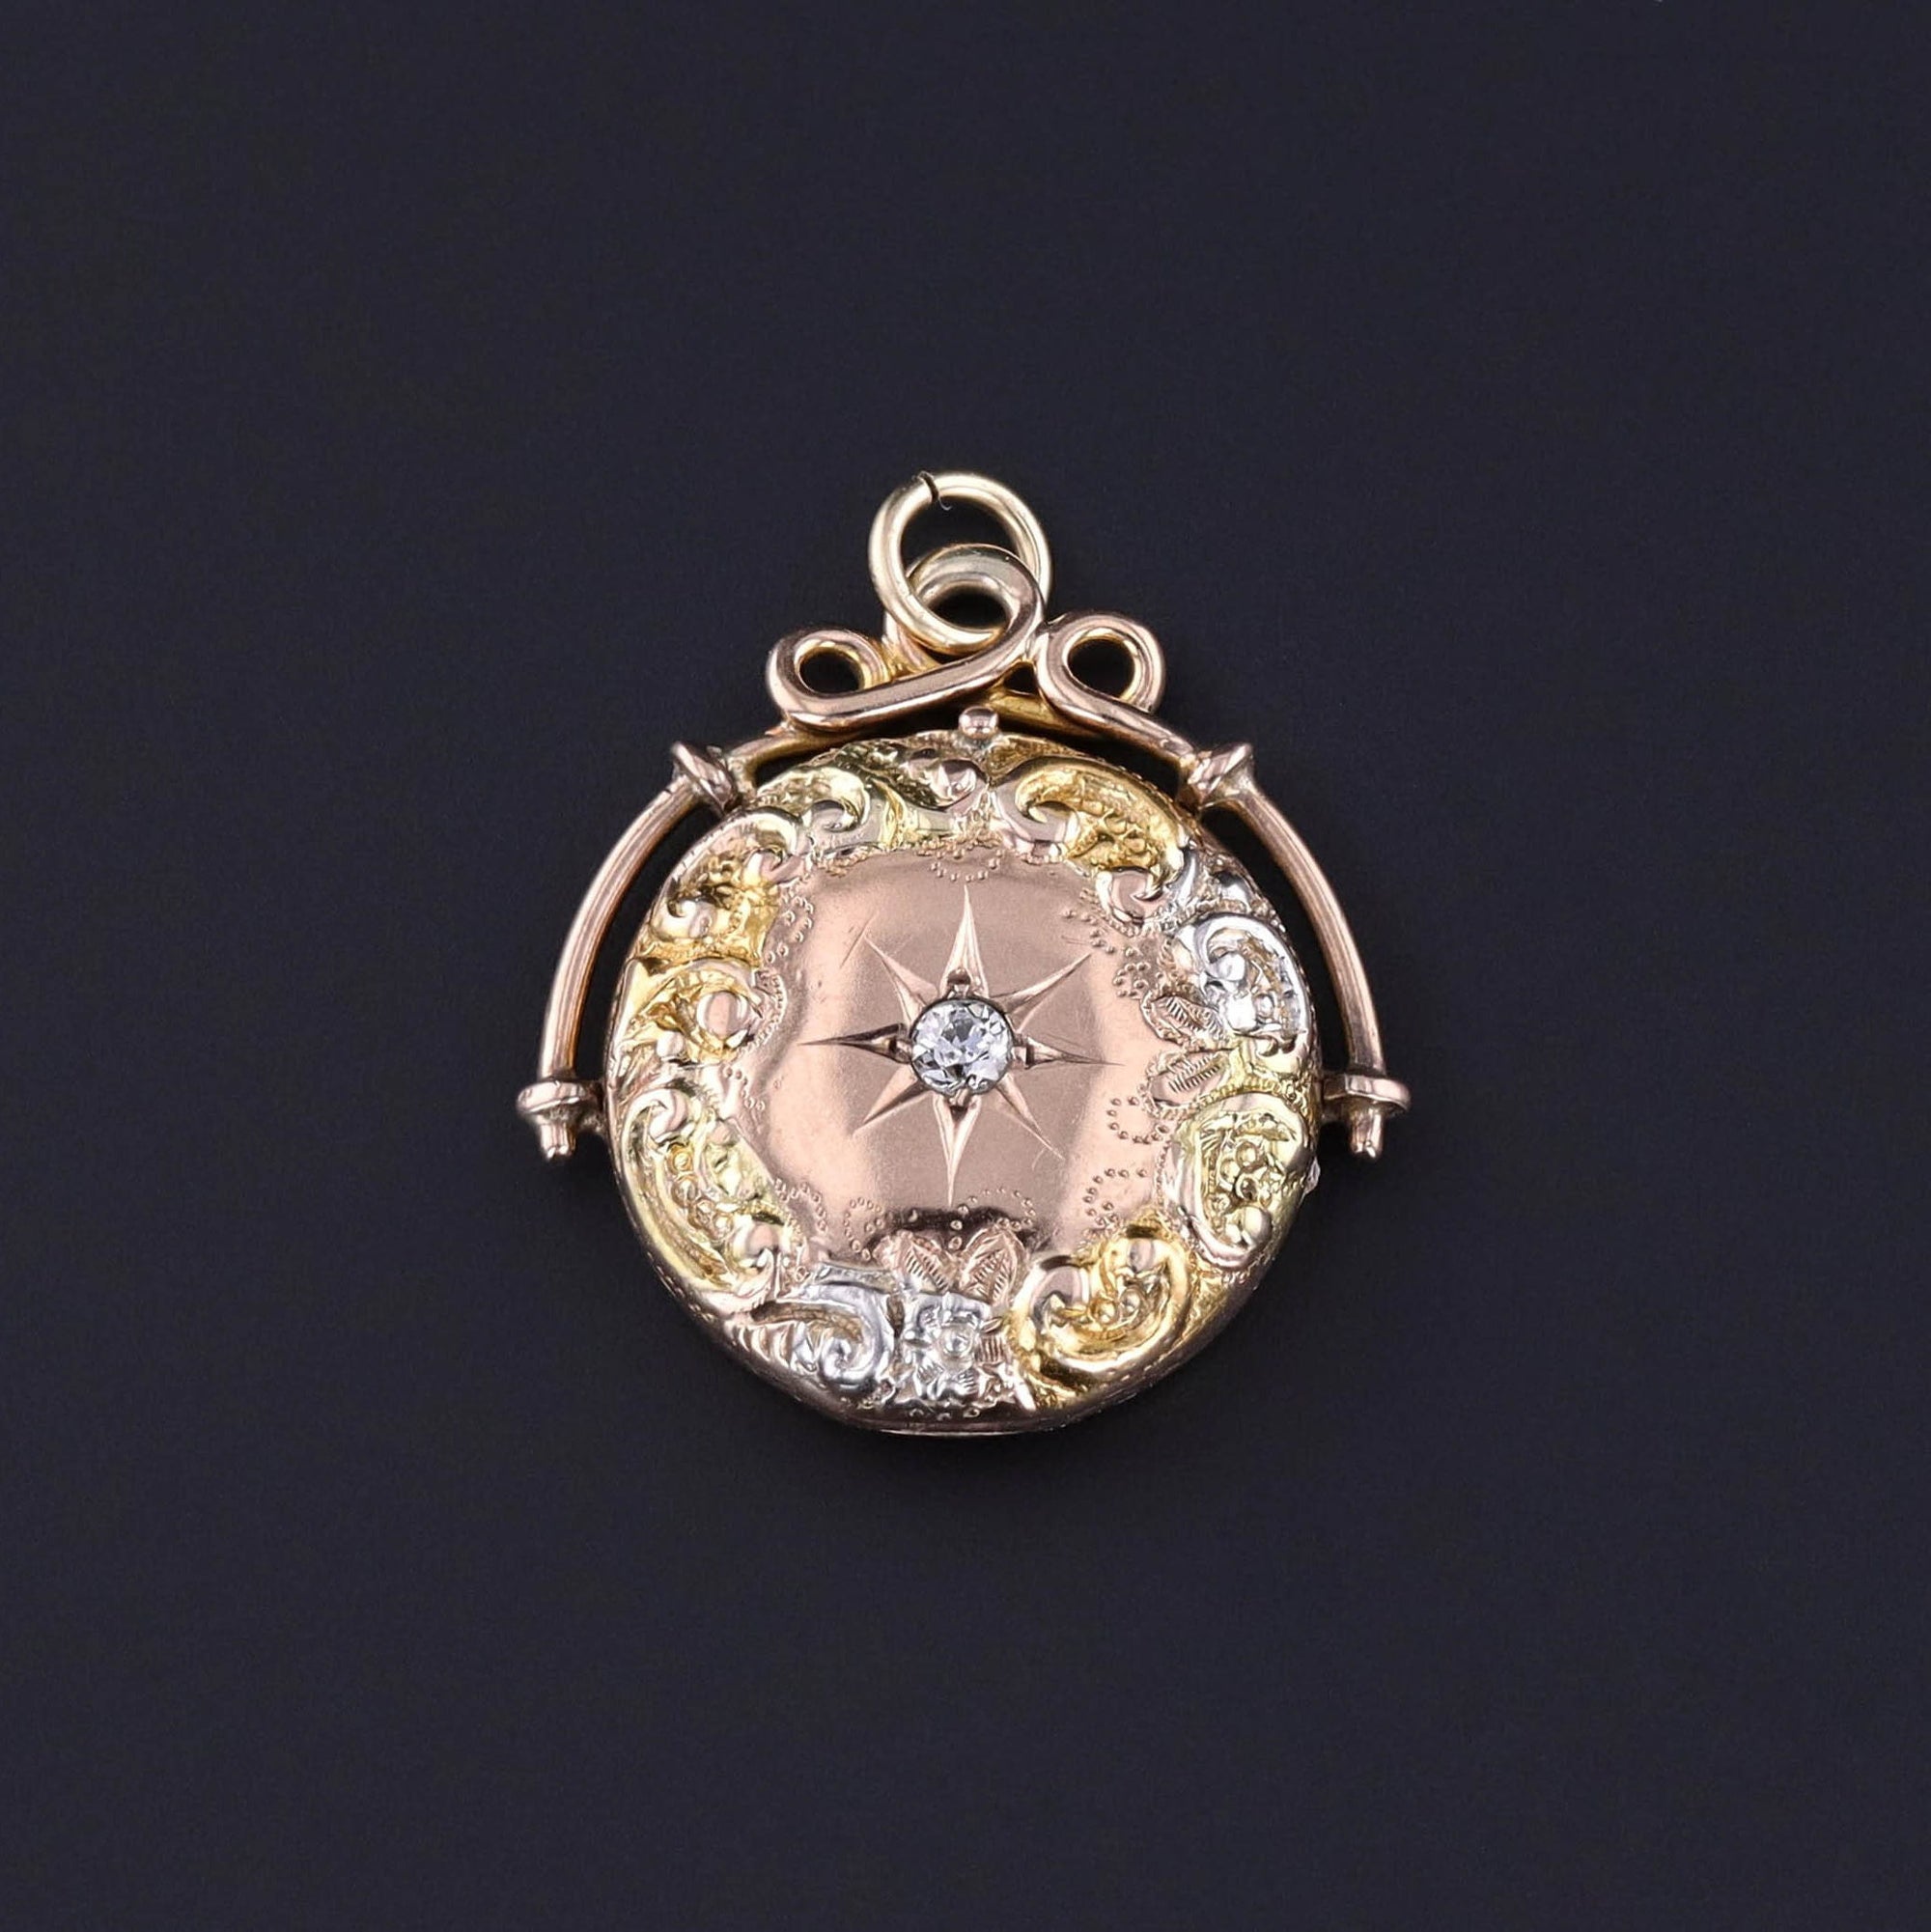 A 10k rose gold locket adorned with a diamond star and accented with yellow gold and platinum. A perfect gift for any antique jewelry lover or anyone looking for a special keepsake.